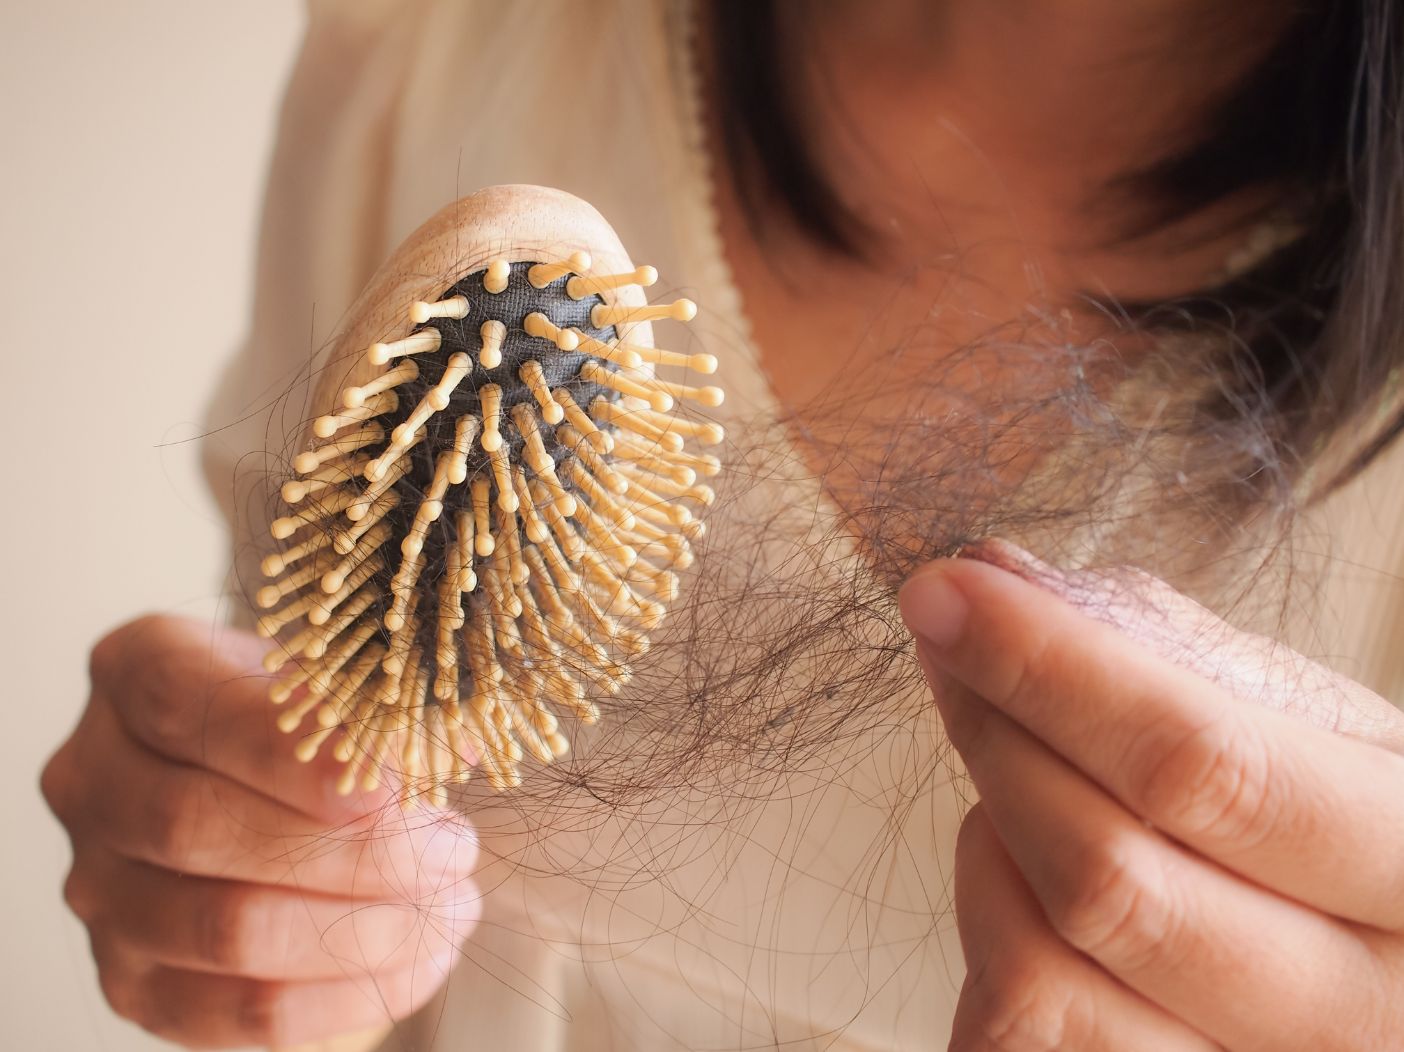 Hair Thinning Or Falling Out? It Could Be A Side Effect Of Menopause